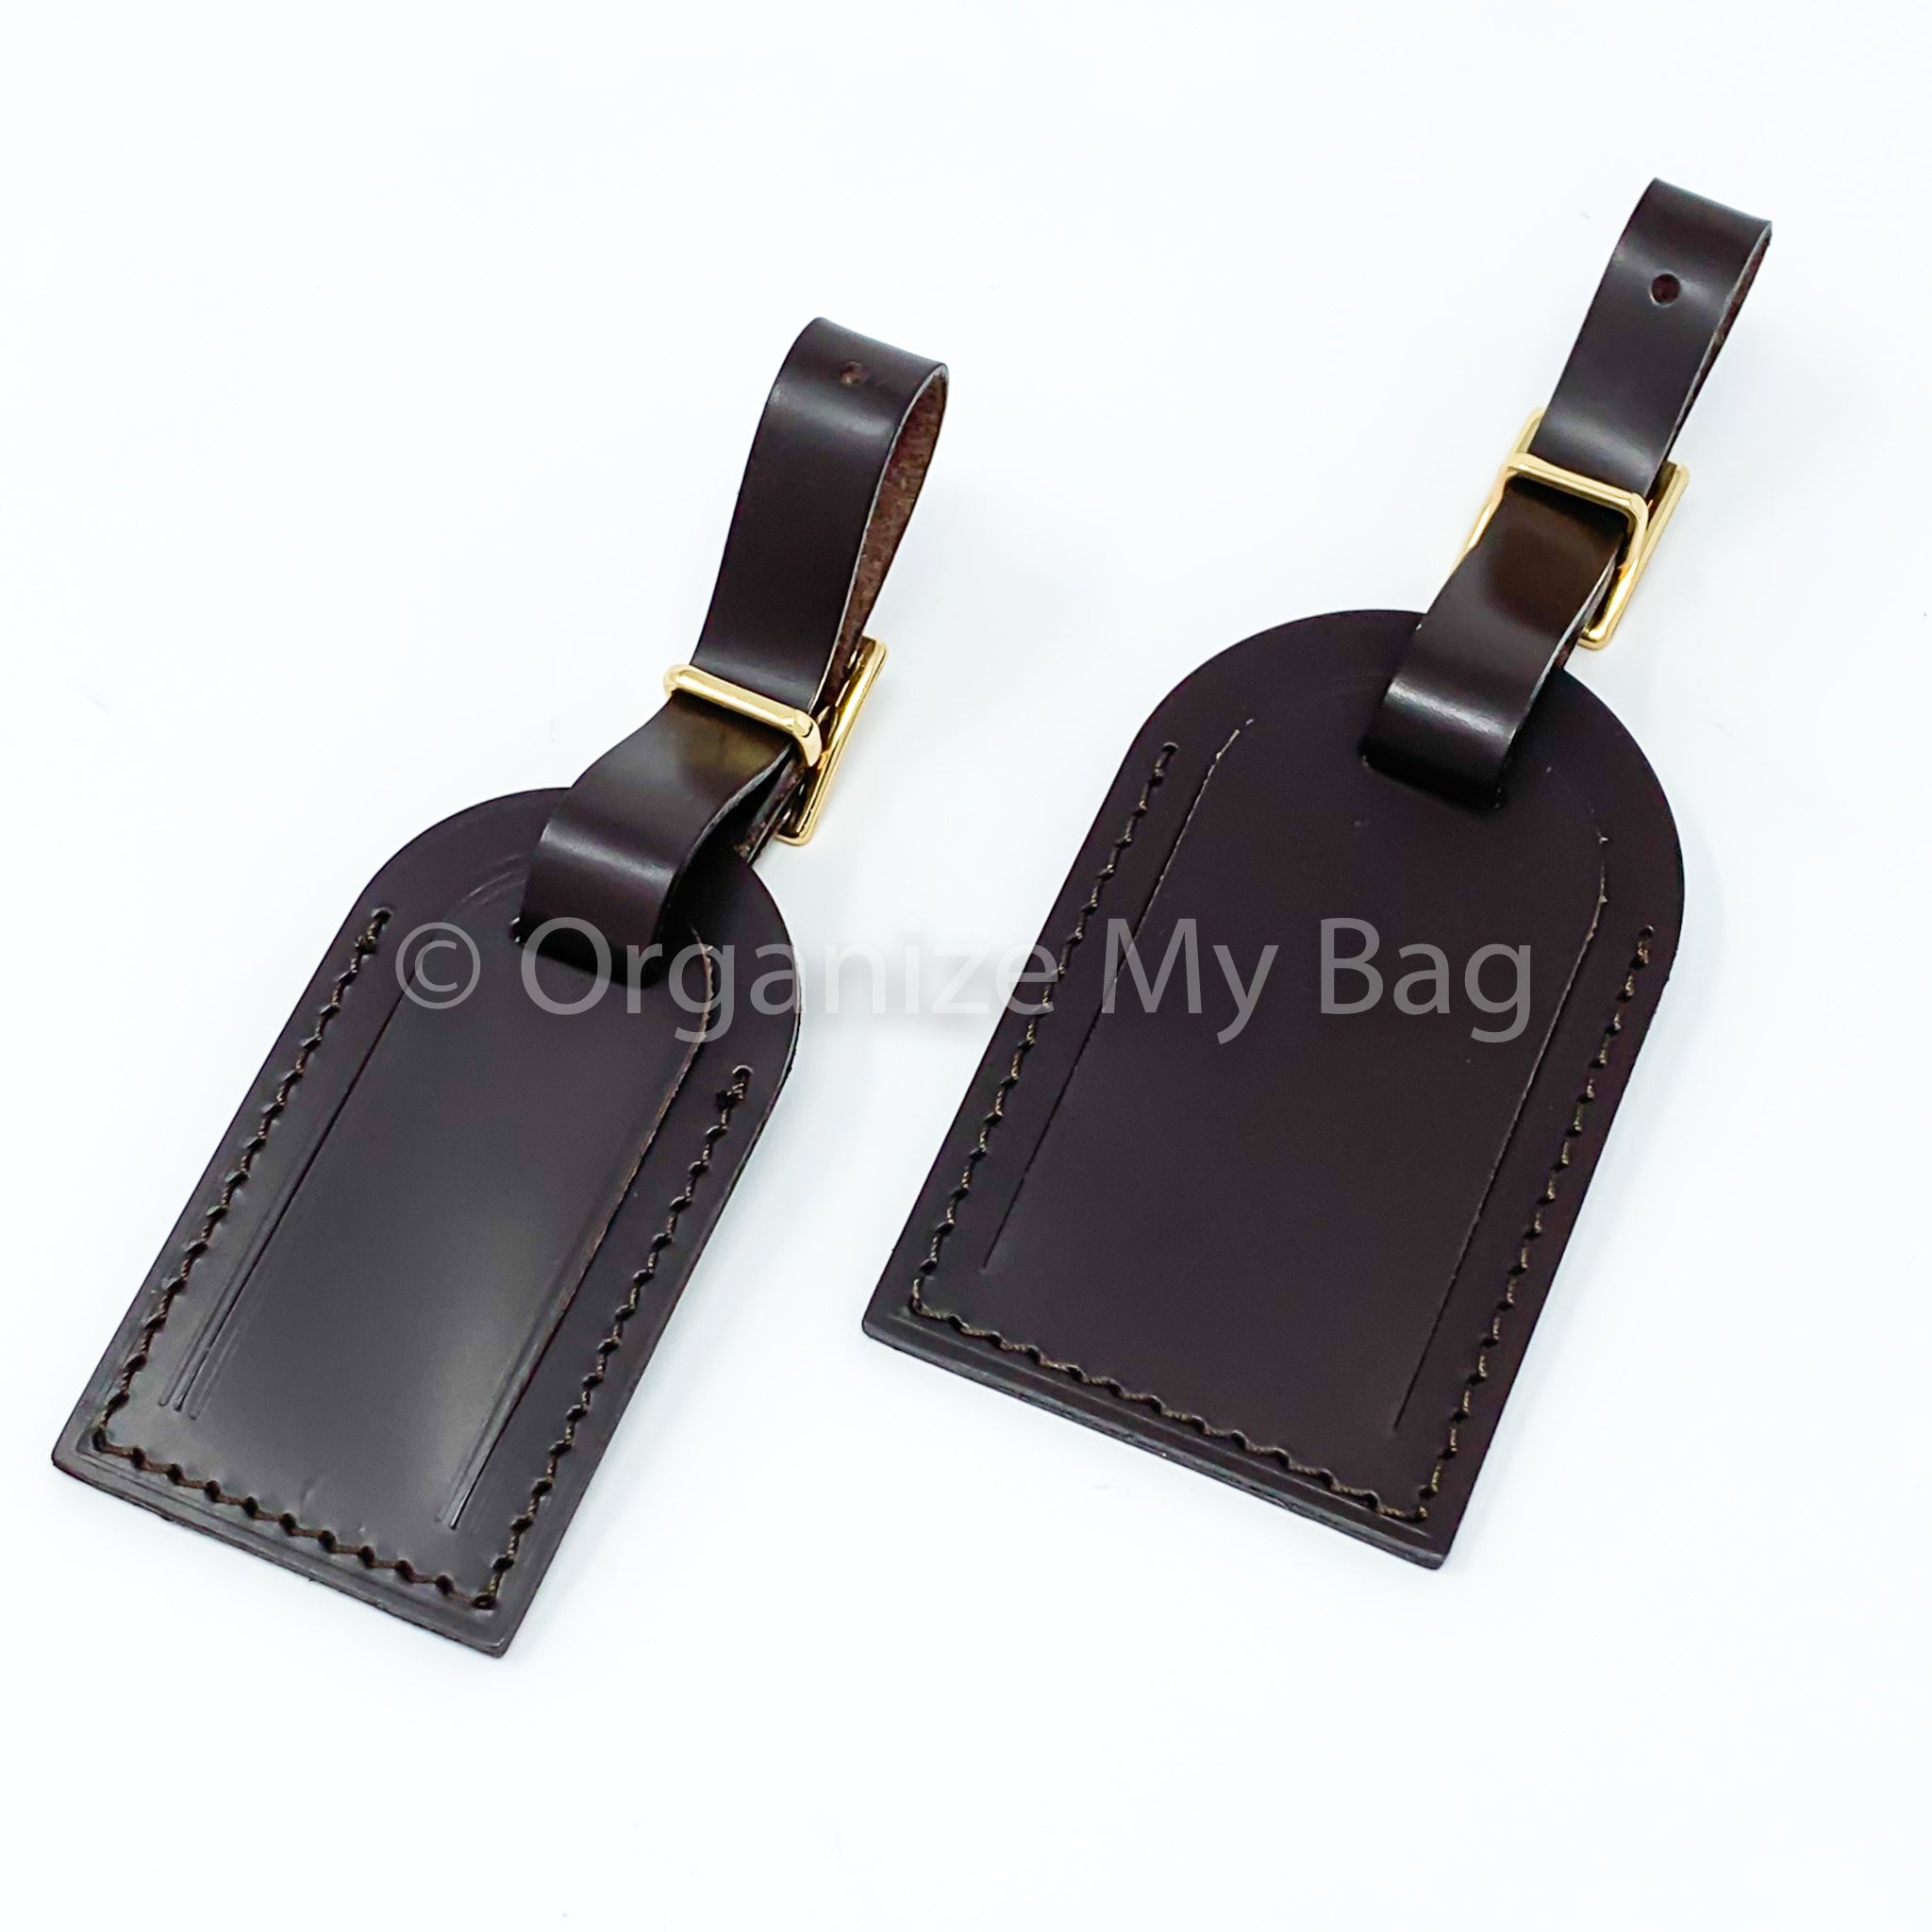 Vachetta Leather Brown Red and Black Luggage Tags Hot 